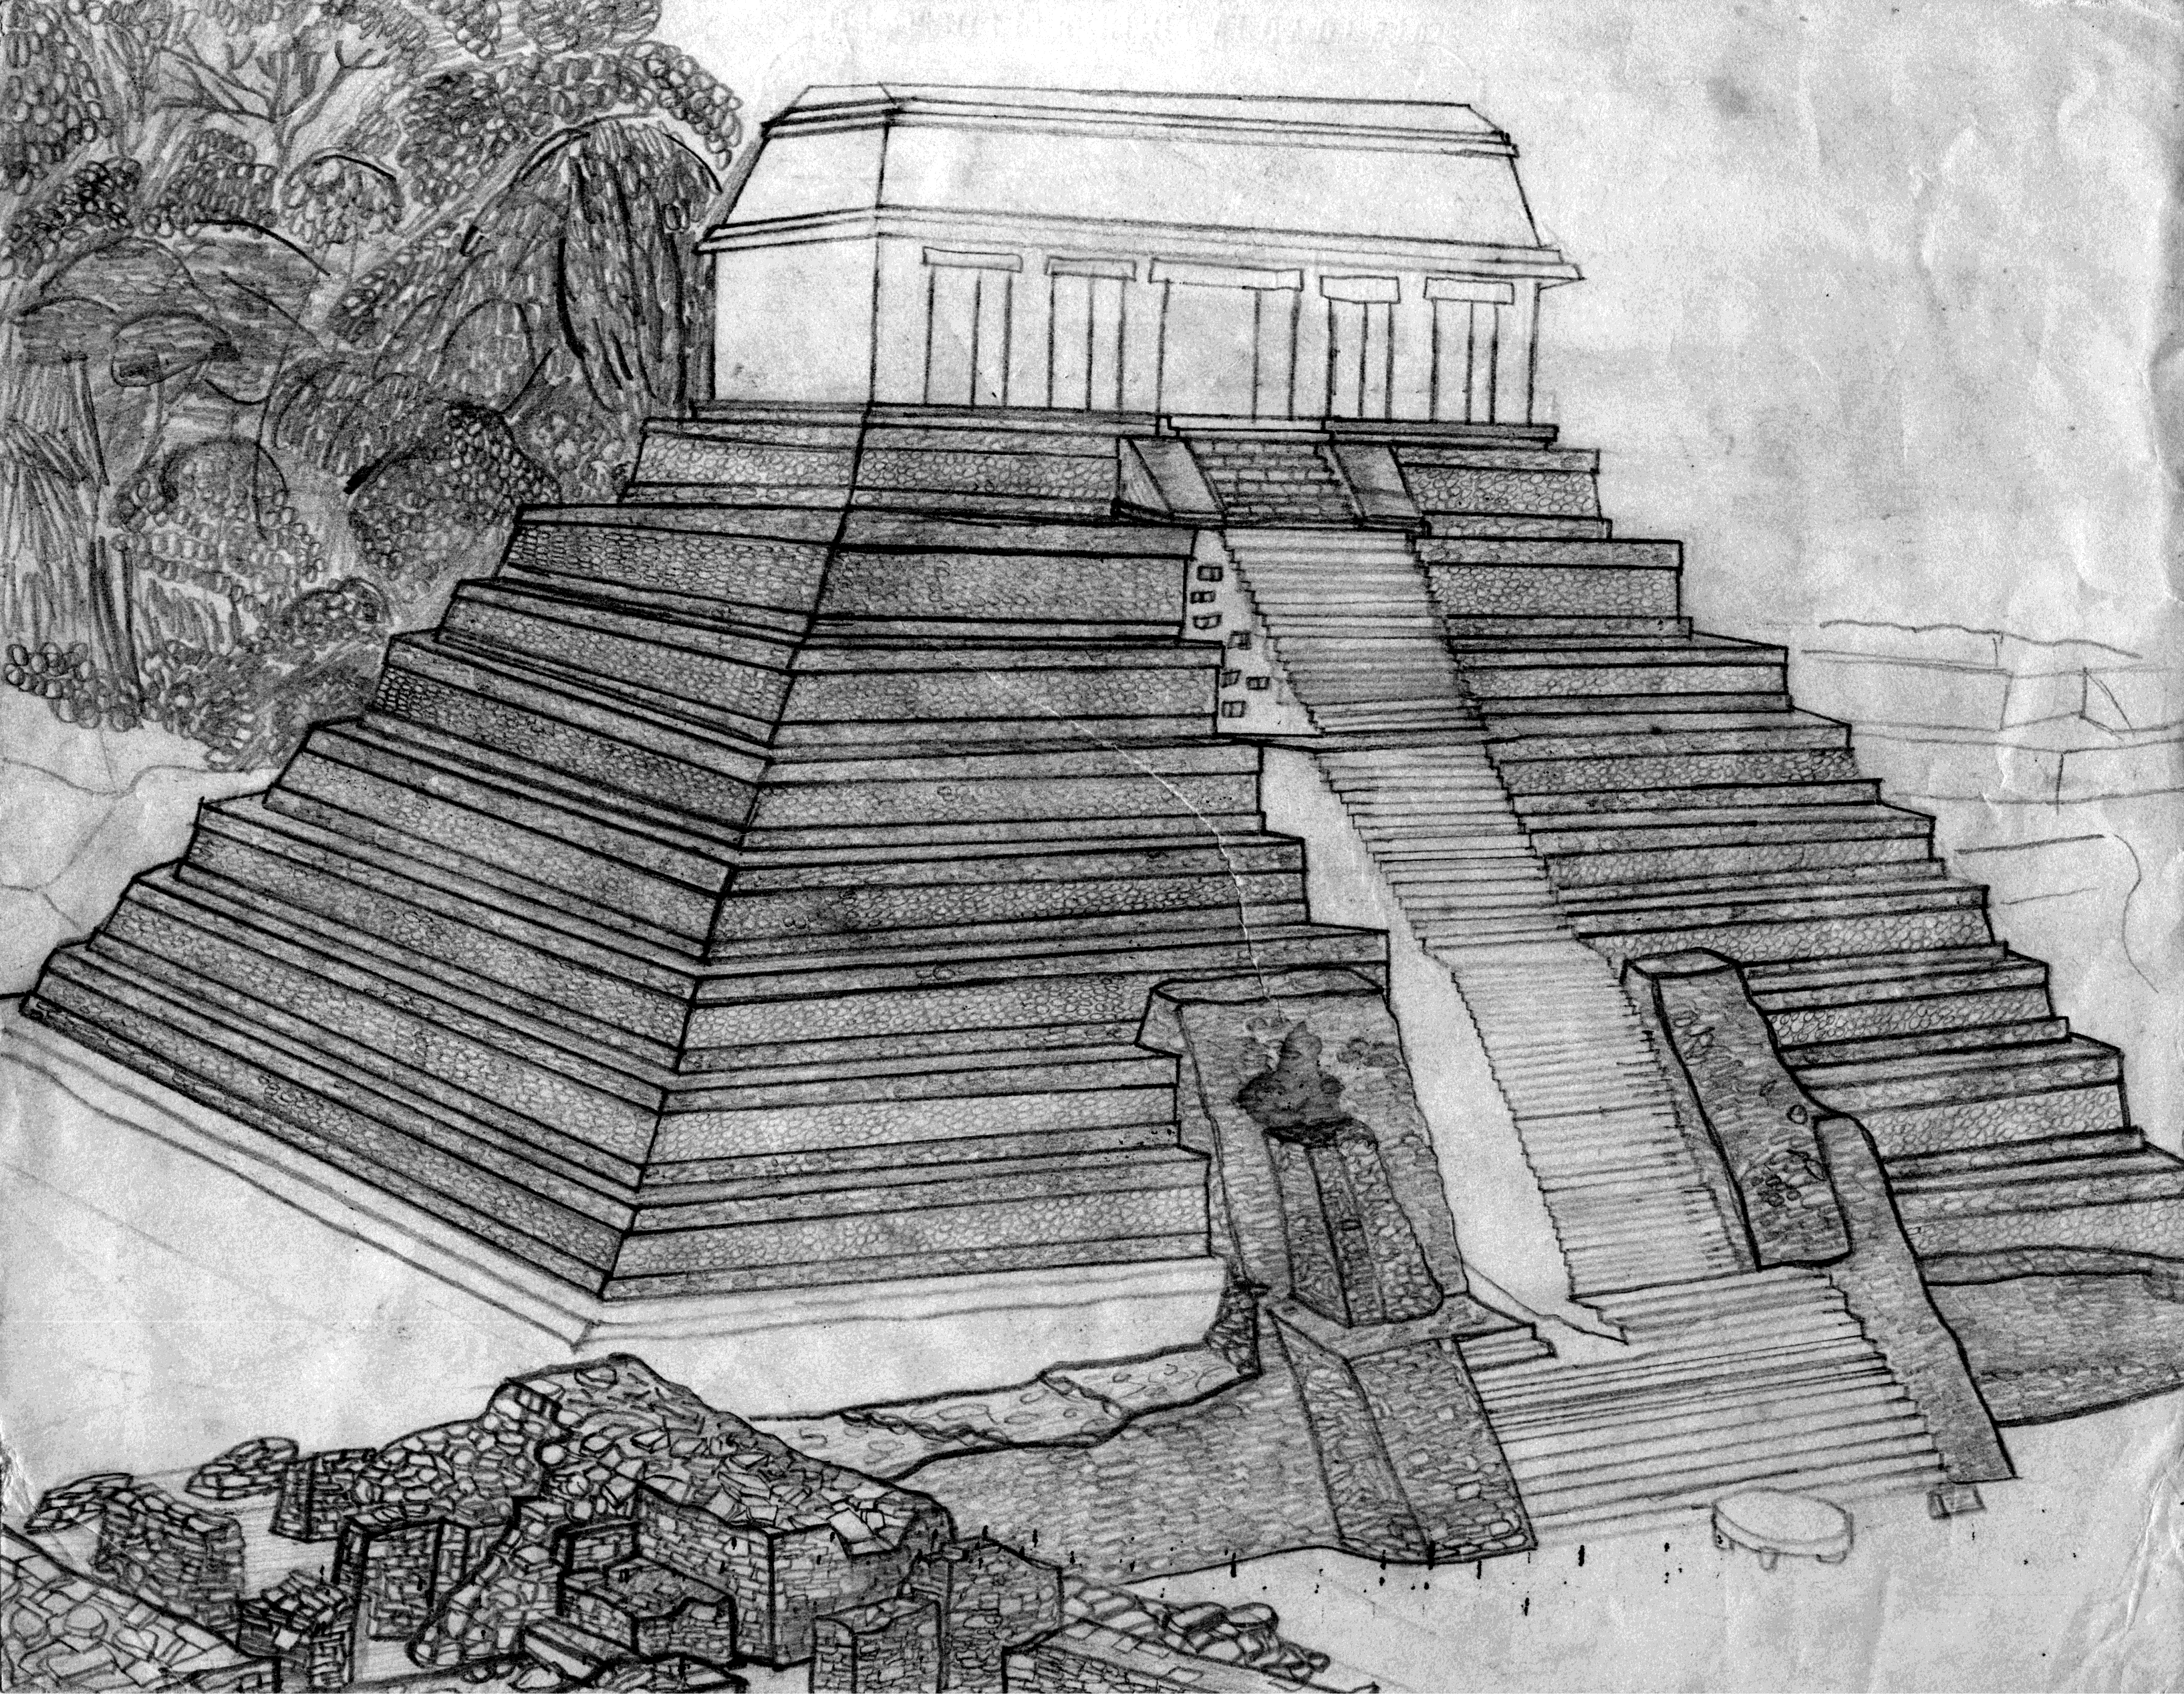 Temple of the Inscriptions - Palenque by Dandelo1 on DeviantArt